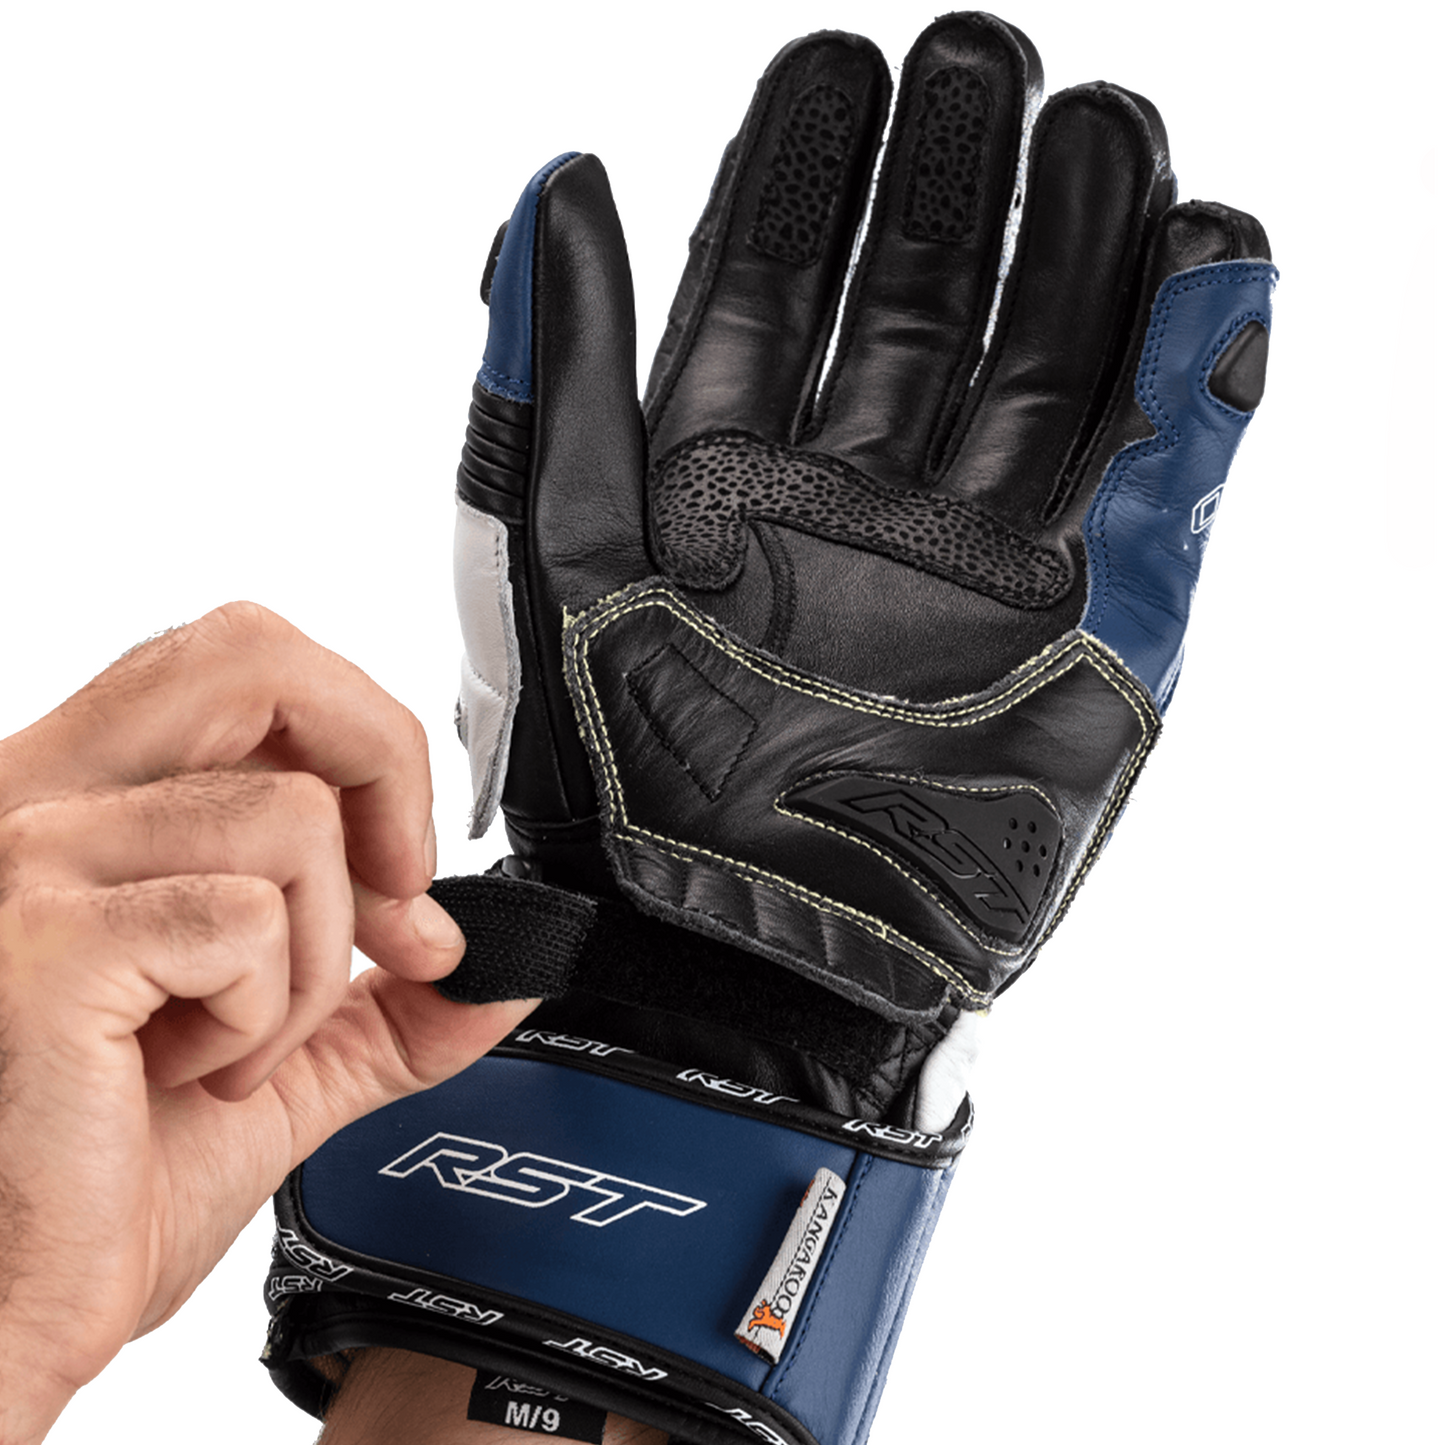 RST Tractech Evo 4 (CE) Gloves - Blue